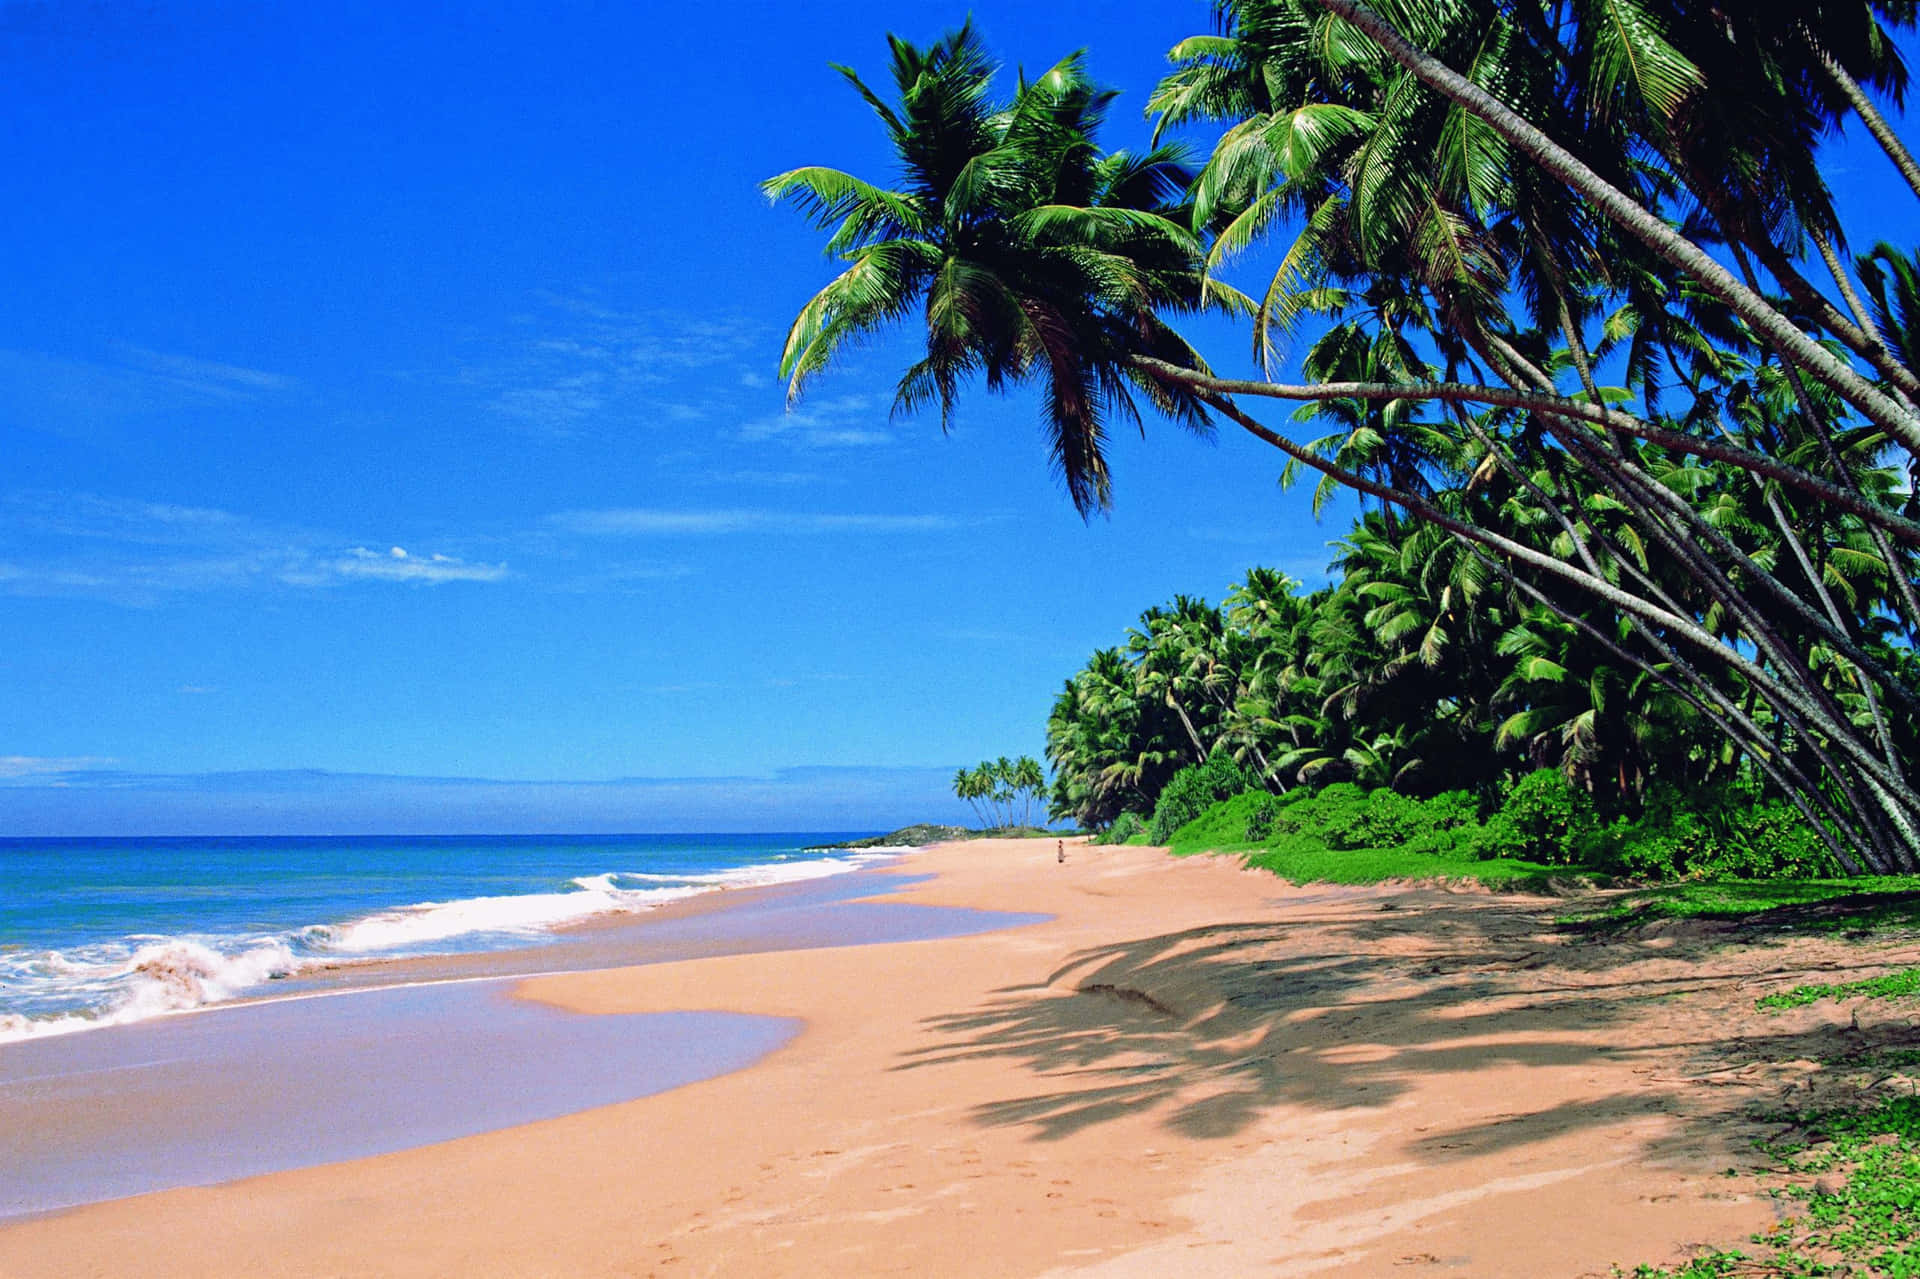 A beautiful view of the beach in Goa, India